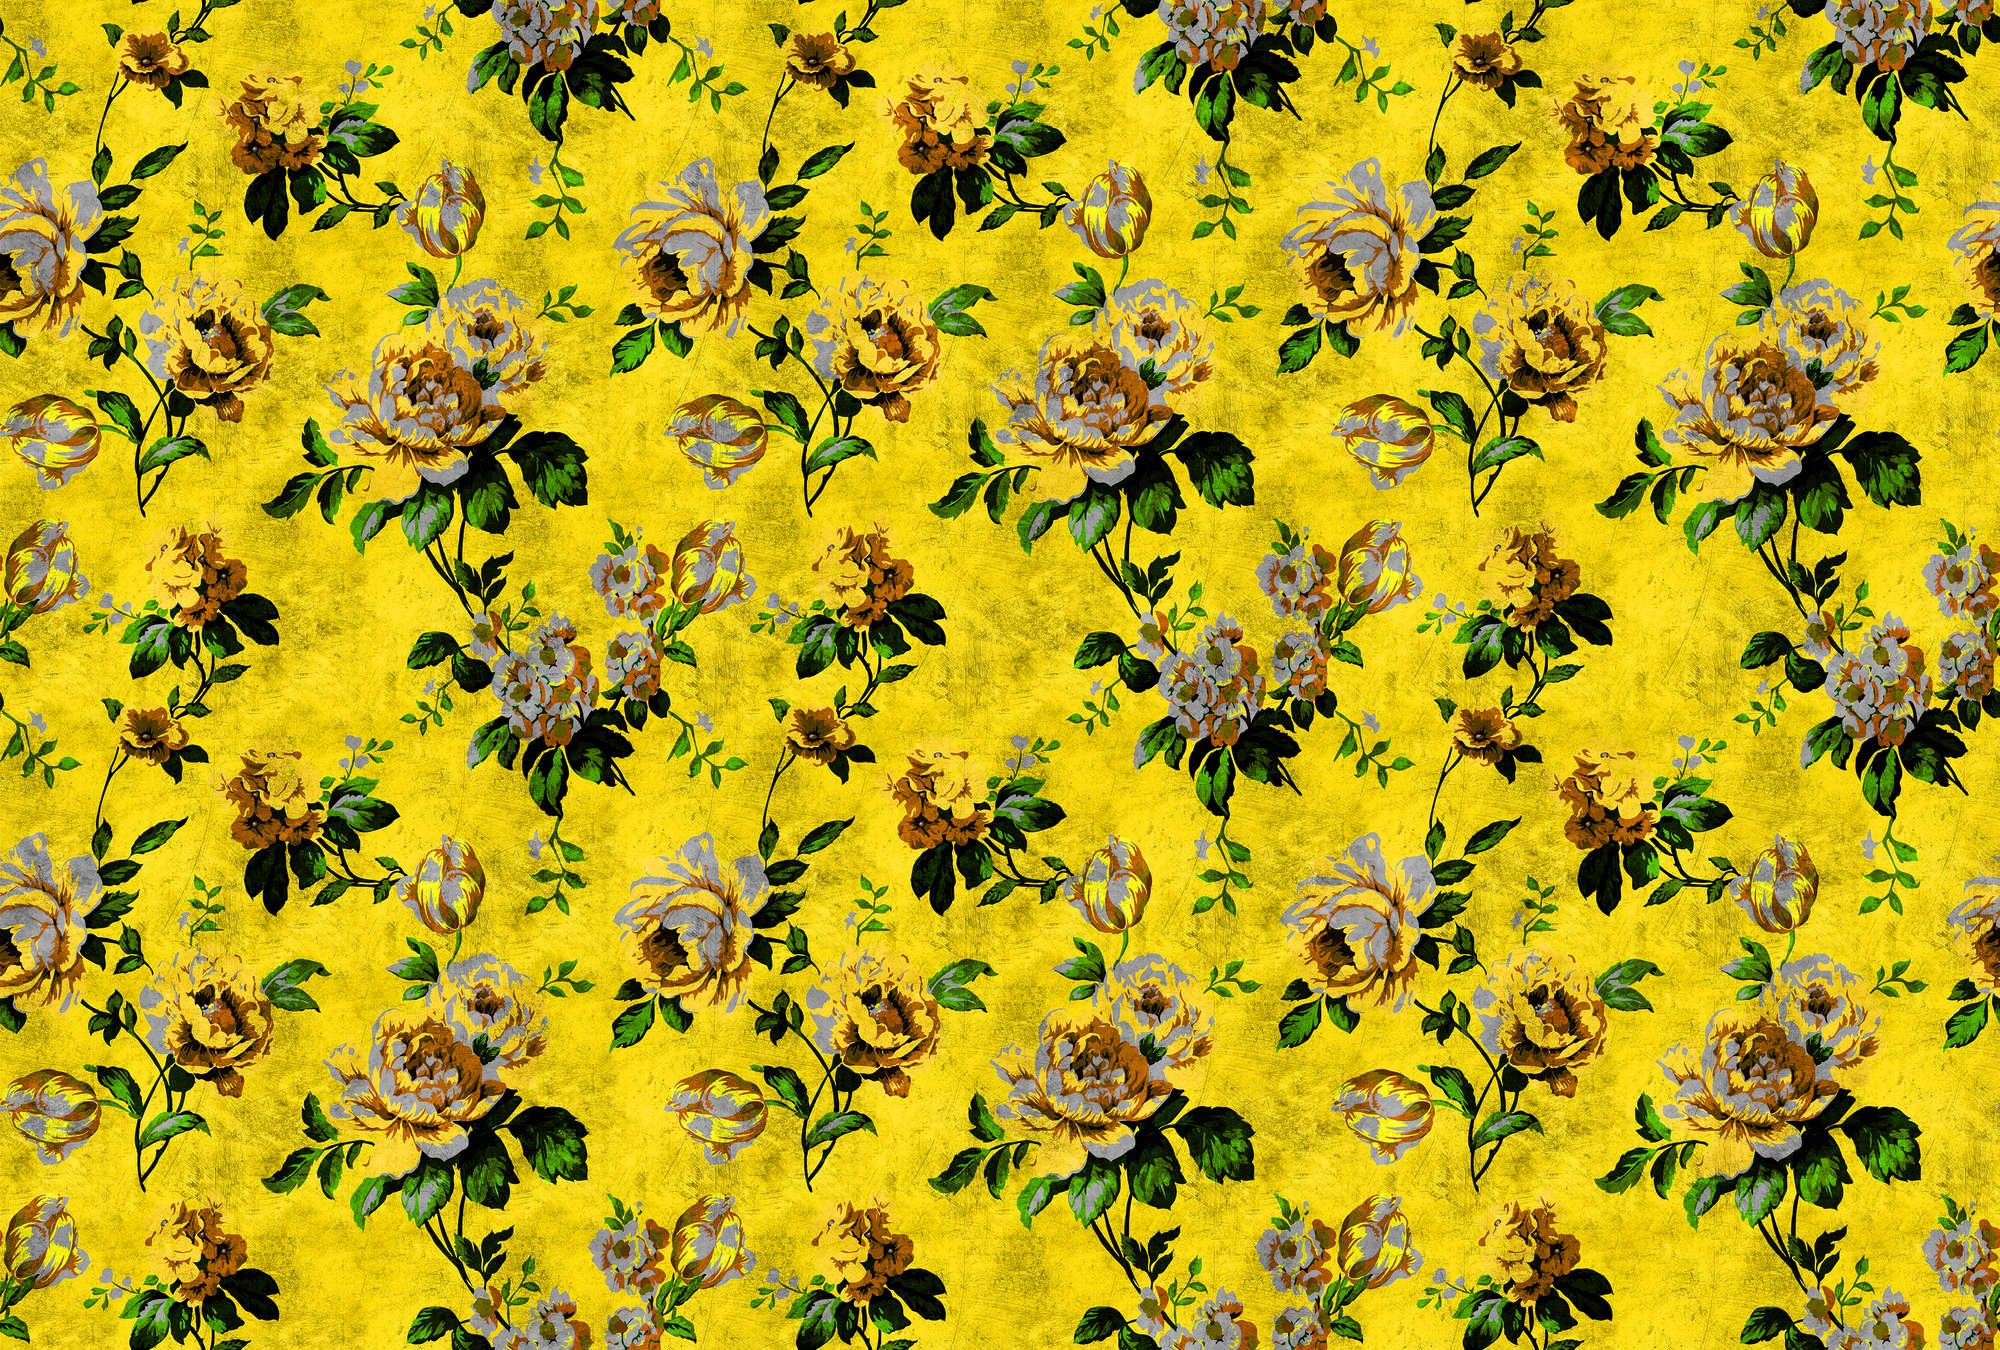             Wild roses 5 - Roses photo wallpaper in scratchy structure in retro look, yellow - yellow, green | mother-of-pearl smooth fleece
        